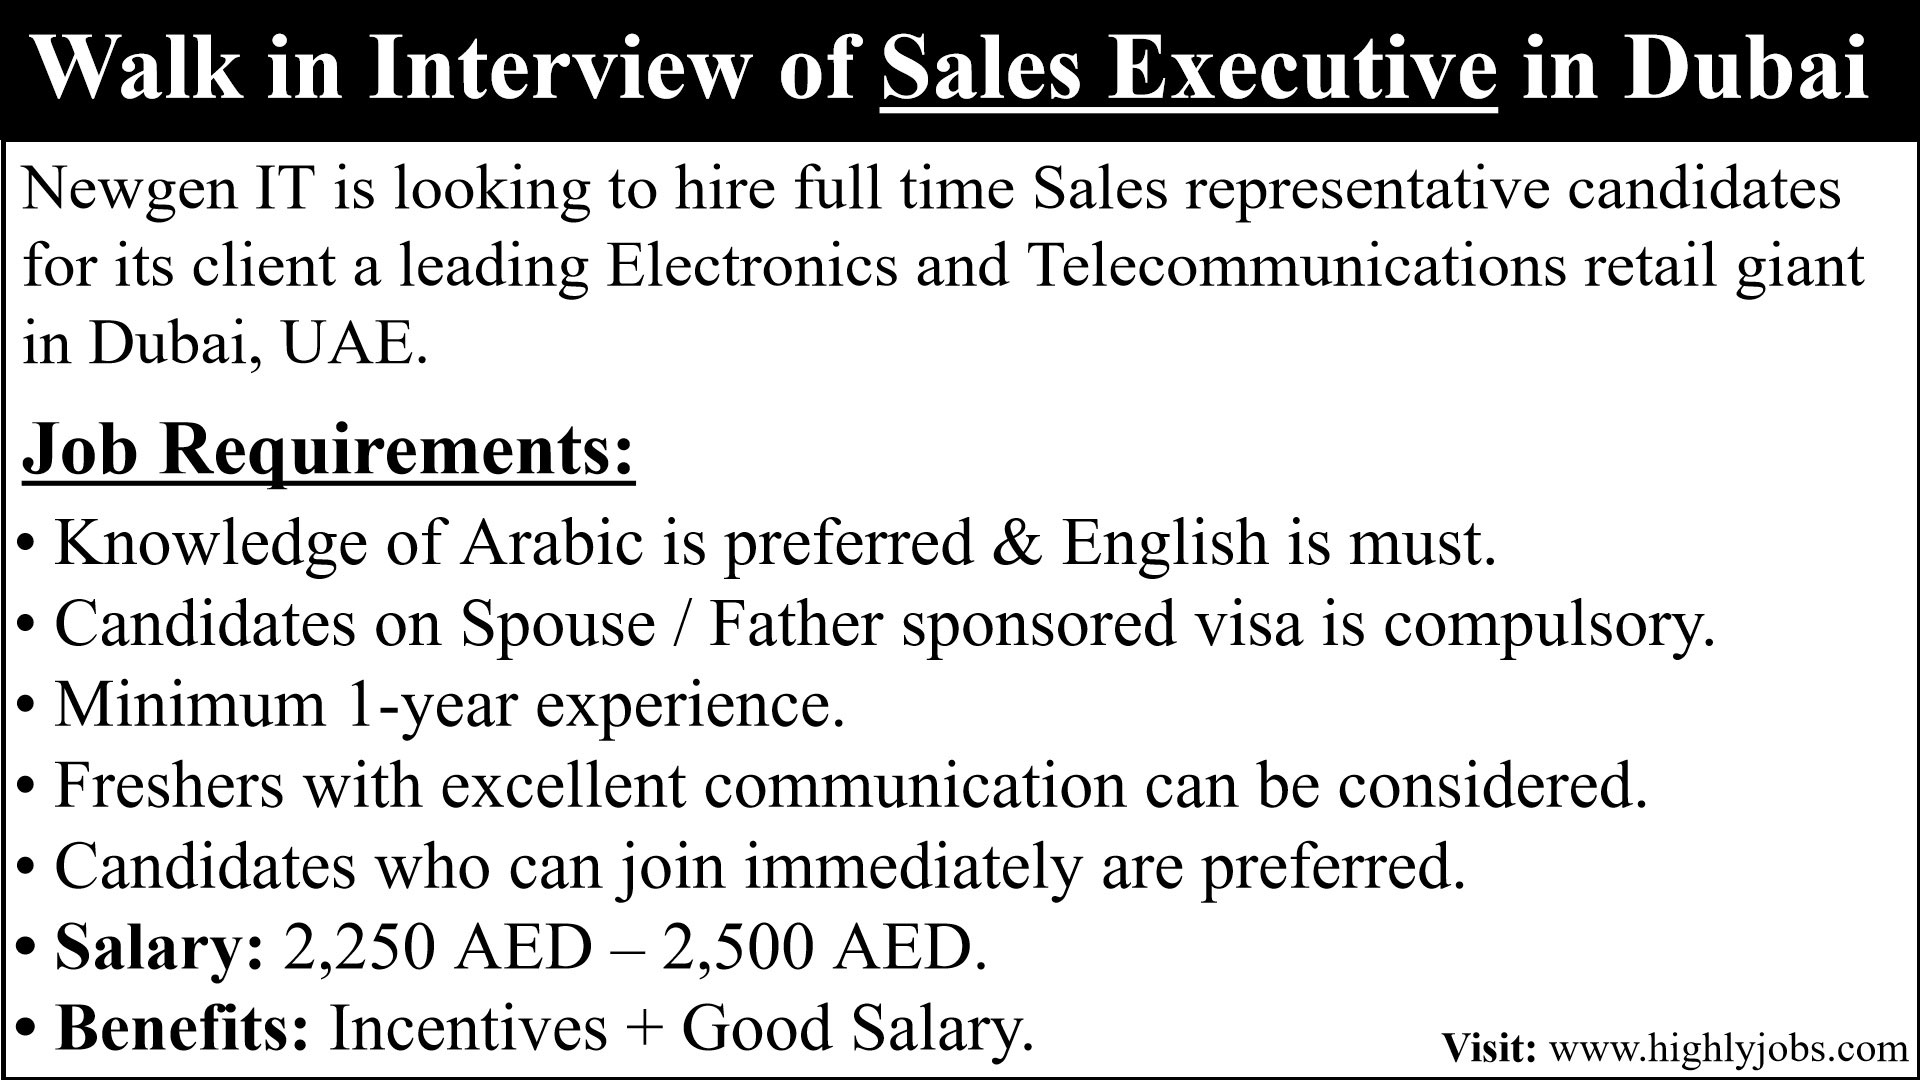 Walk in Interview of Sales Executive in Dubai 